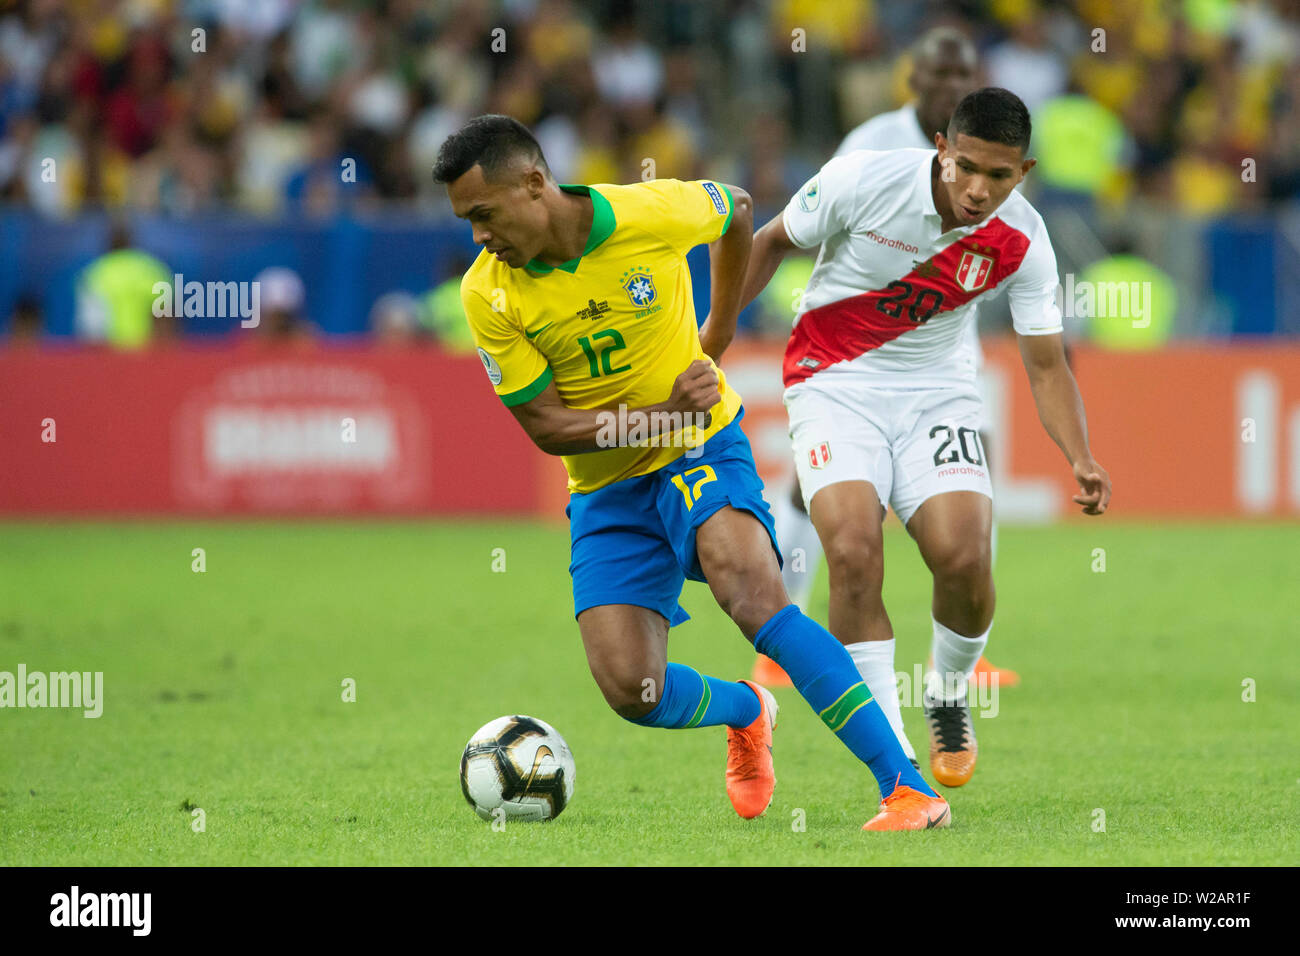 Rio De Janeiro, Brazil. 07th July, 2019. Alex Sandro Silva and Edison Flores Peralta during a match between Brazil and Peru, valid for the final of the Copa America 2019, held this Sunday (07) at the Maracanã Stadium in Rio de Janeiro, RJ. Credit: Celso Pupo/FotoArena/Alamy Live News Stock Photo